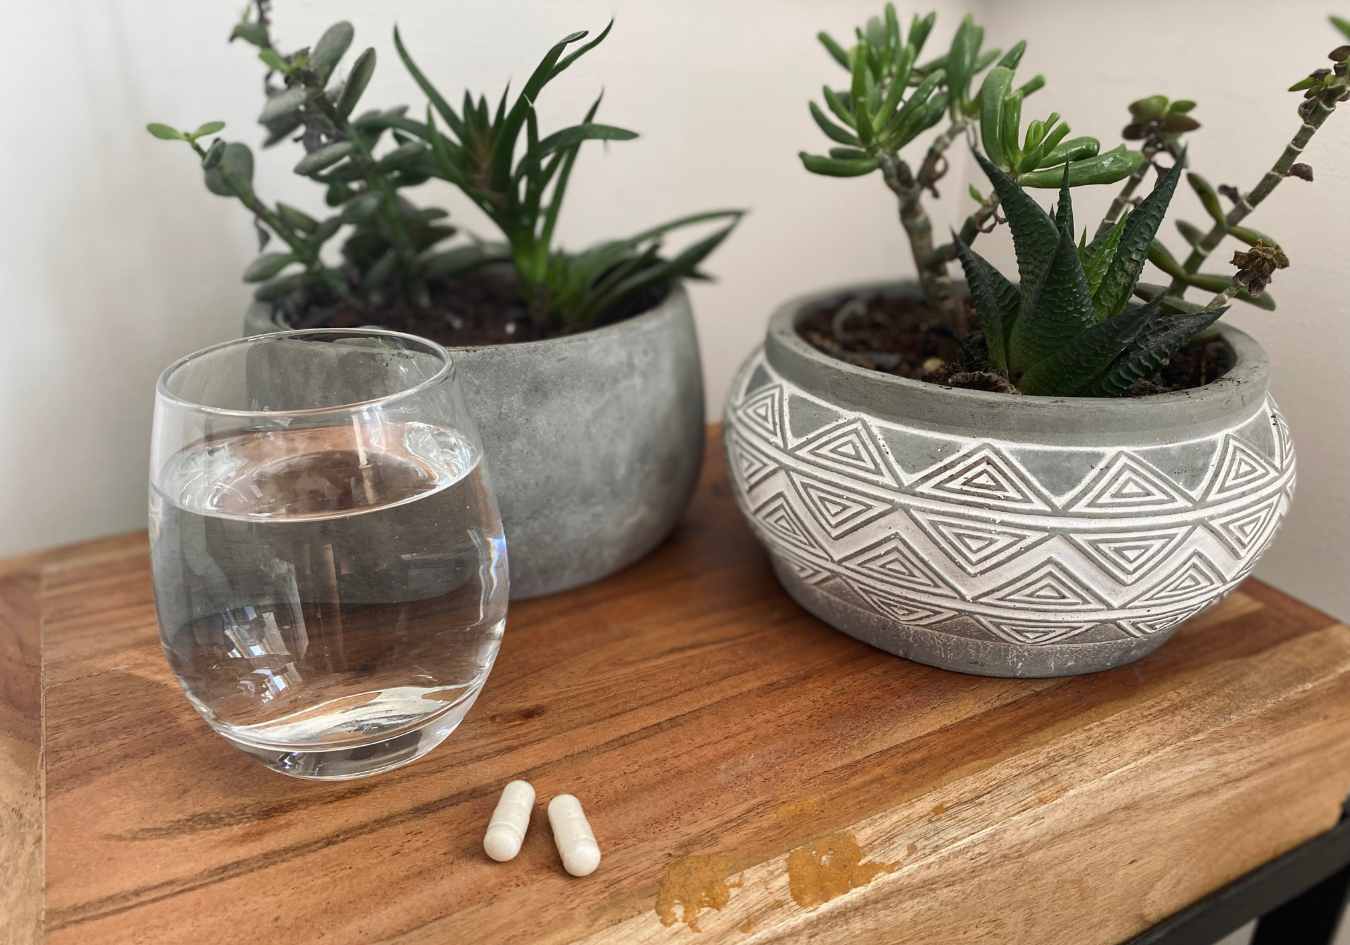 A glass of water next to two vegan vitamin B12 supplements in front of two plants on a wooden surface